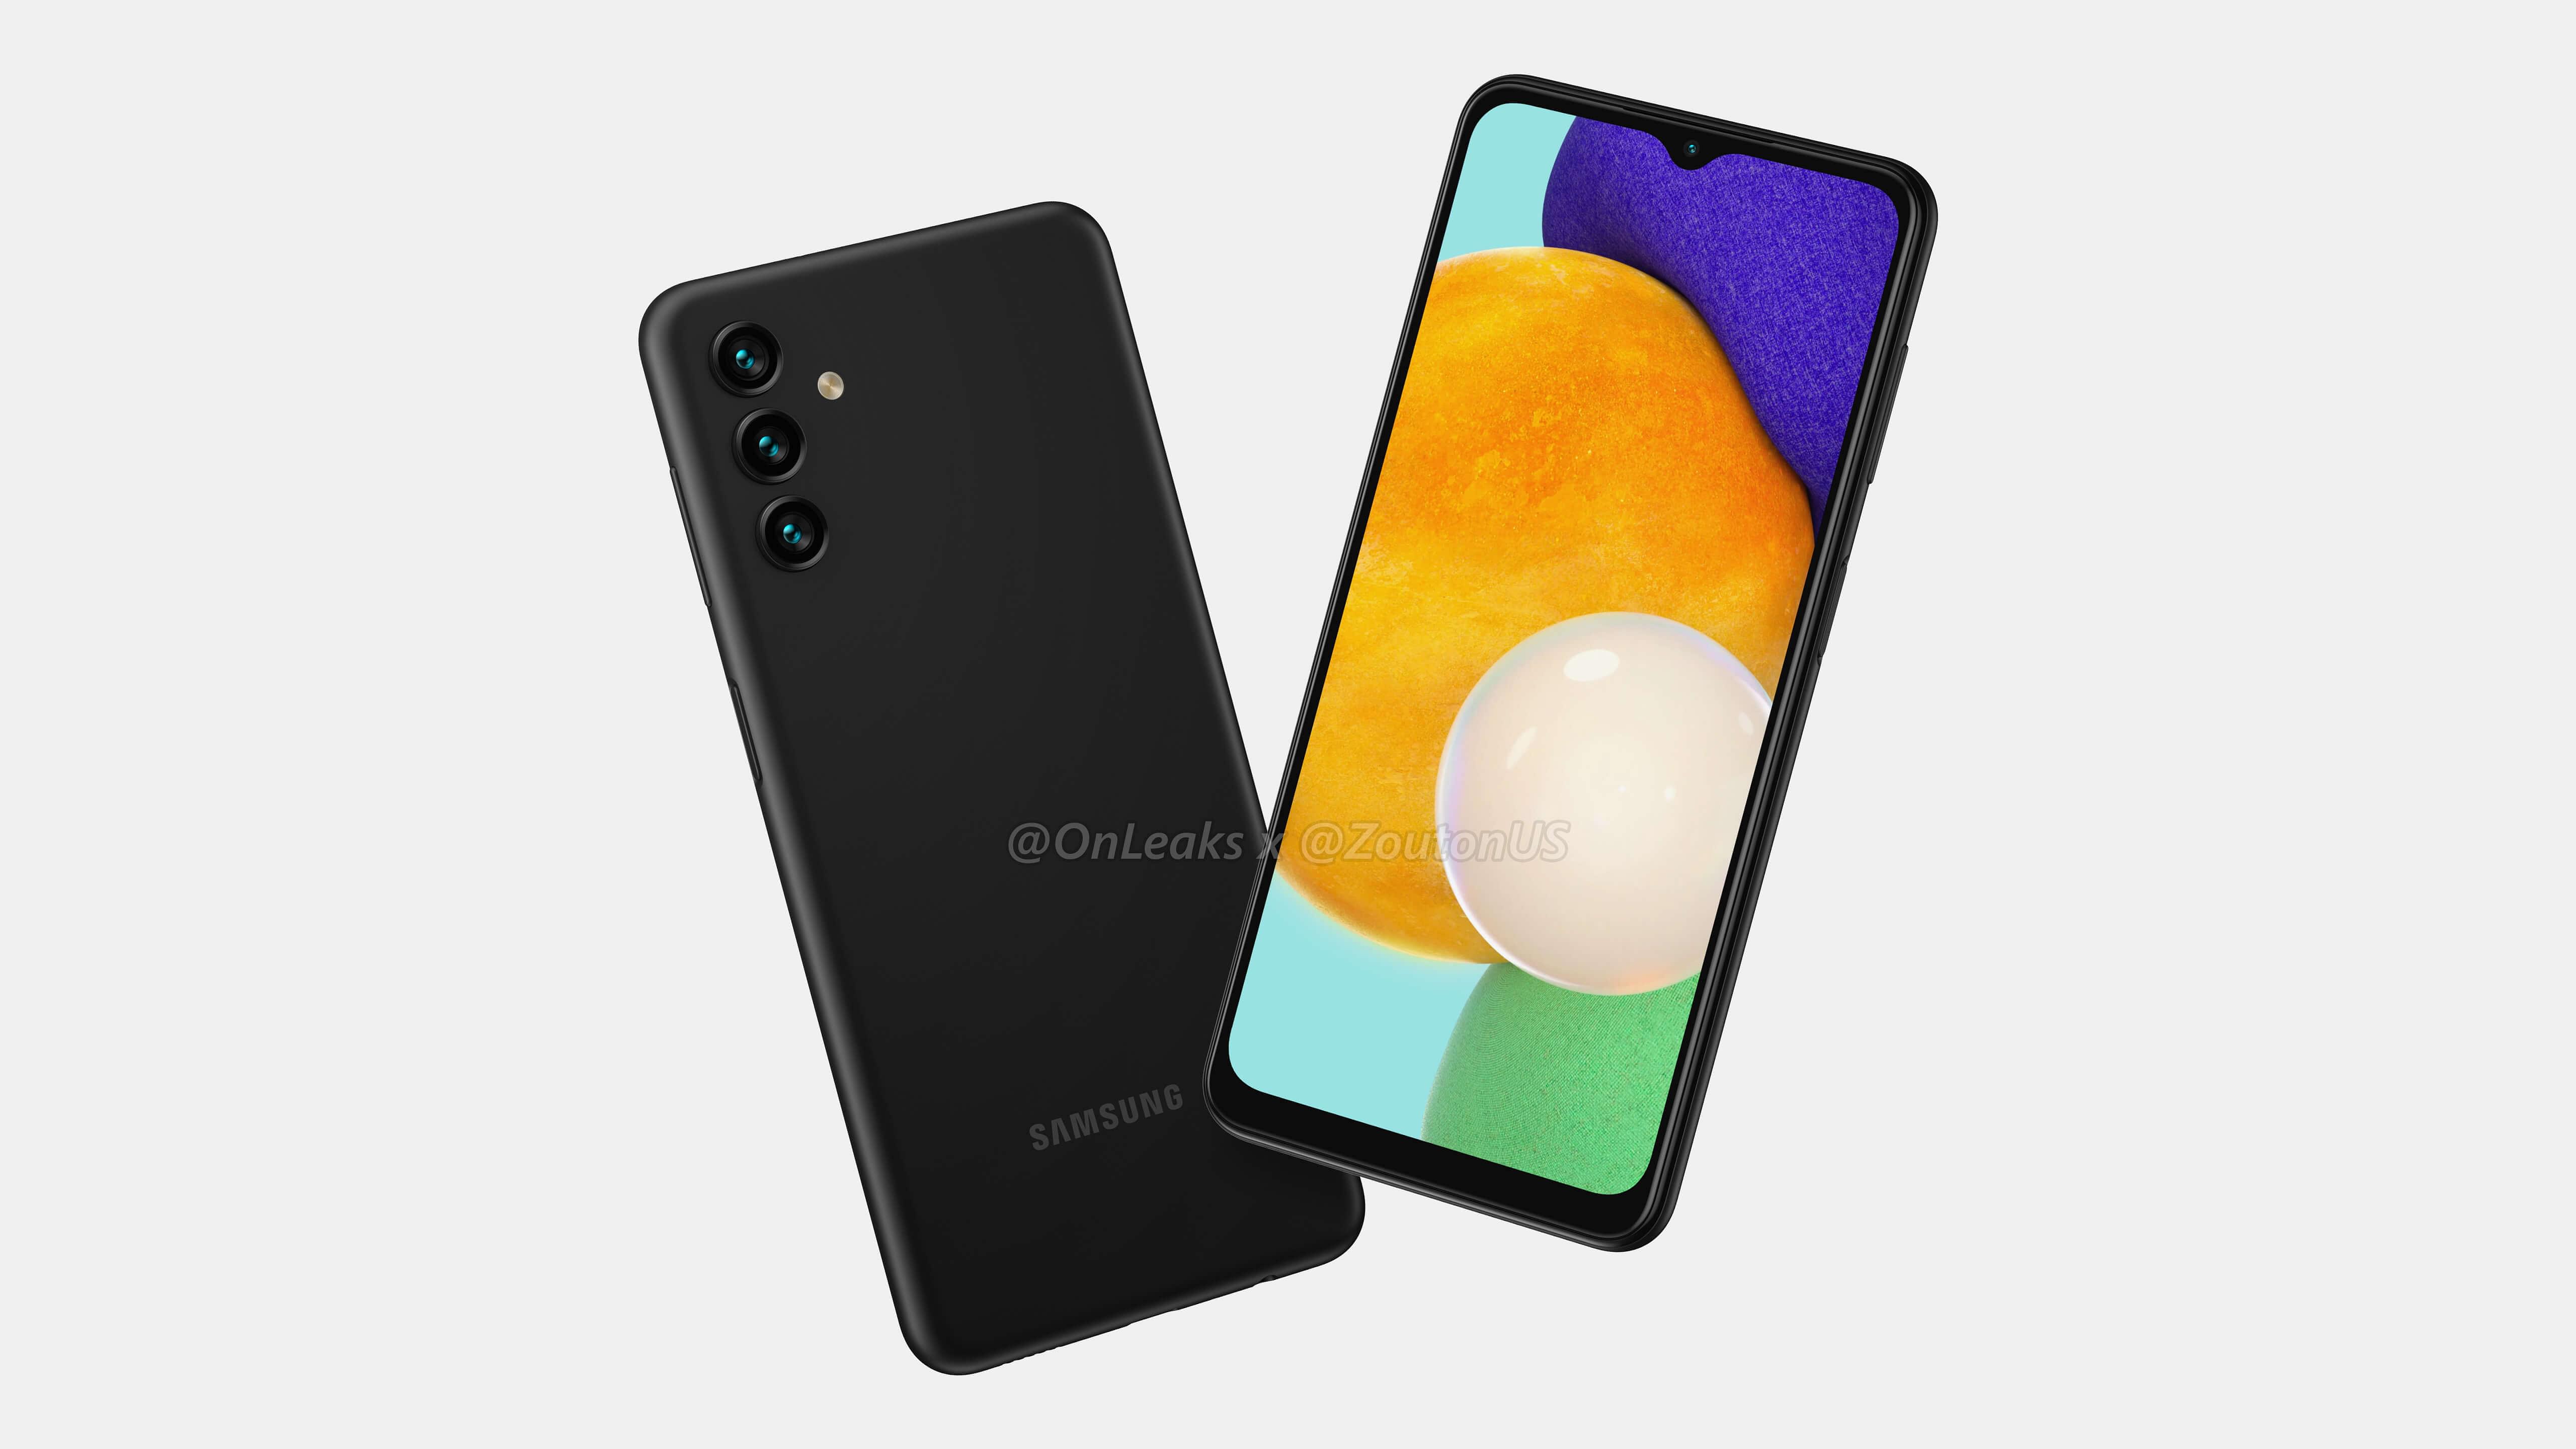 An insider showed what the Samsung Galaxy A13 5G will look like: a budget phone with a MediaTek Dimensity 700 chip and a 50 MP camera